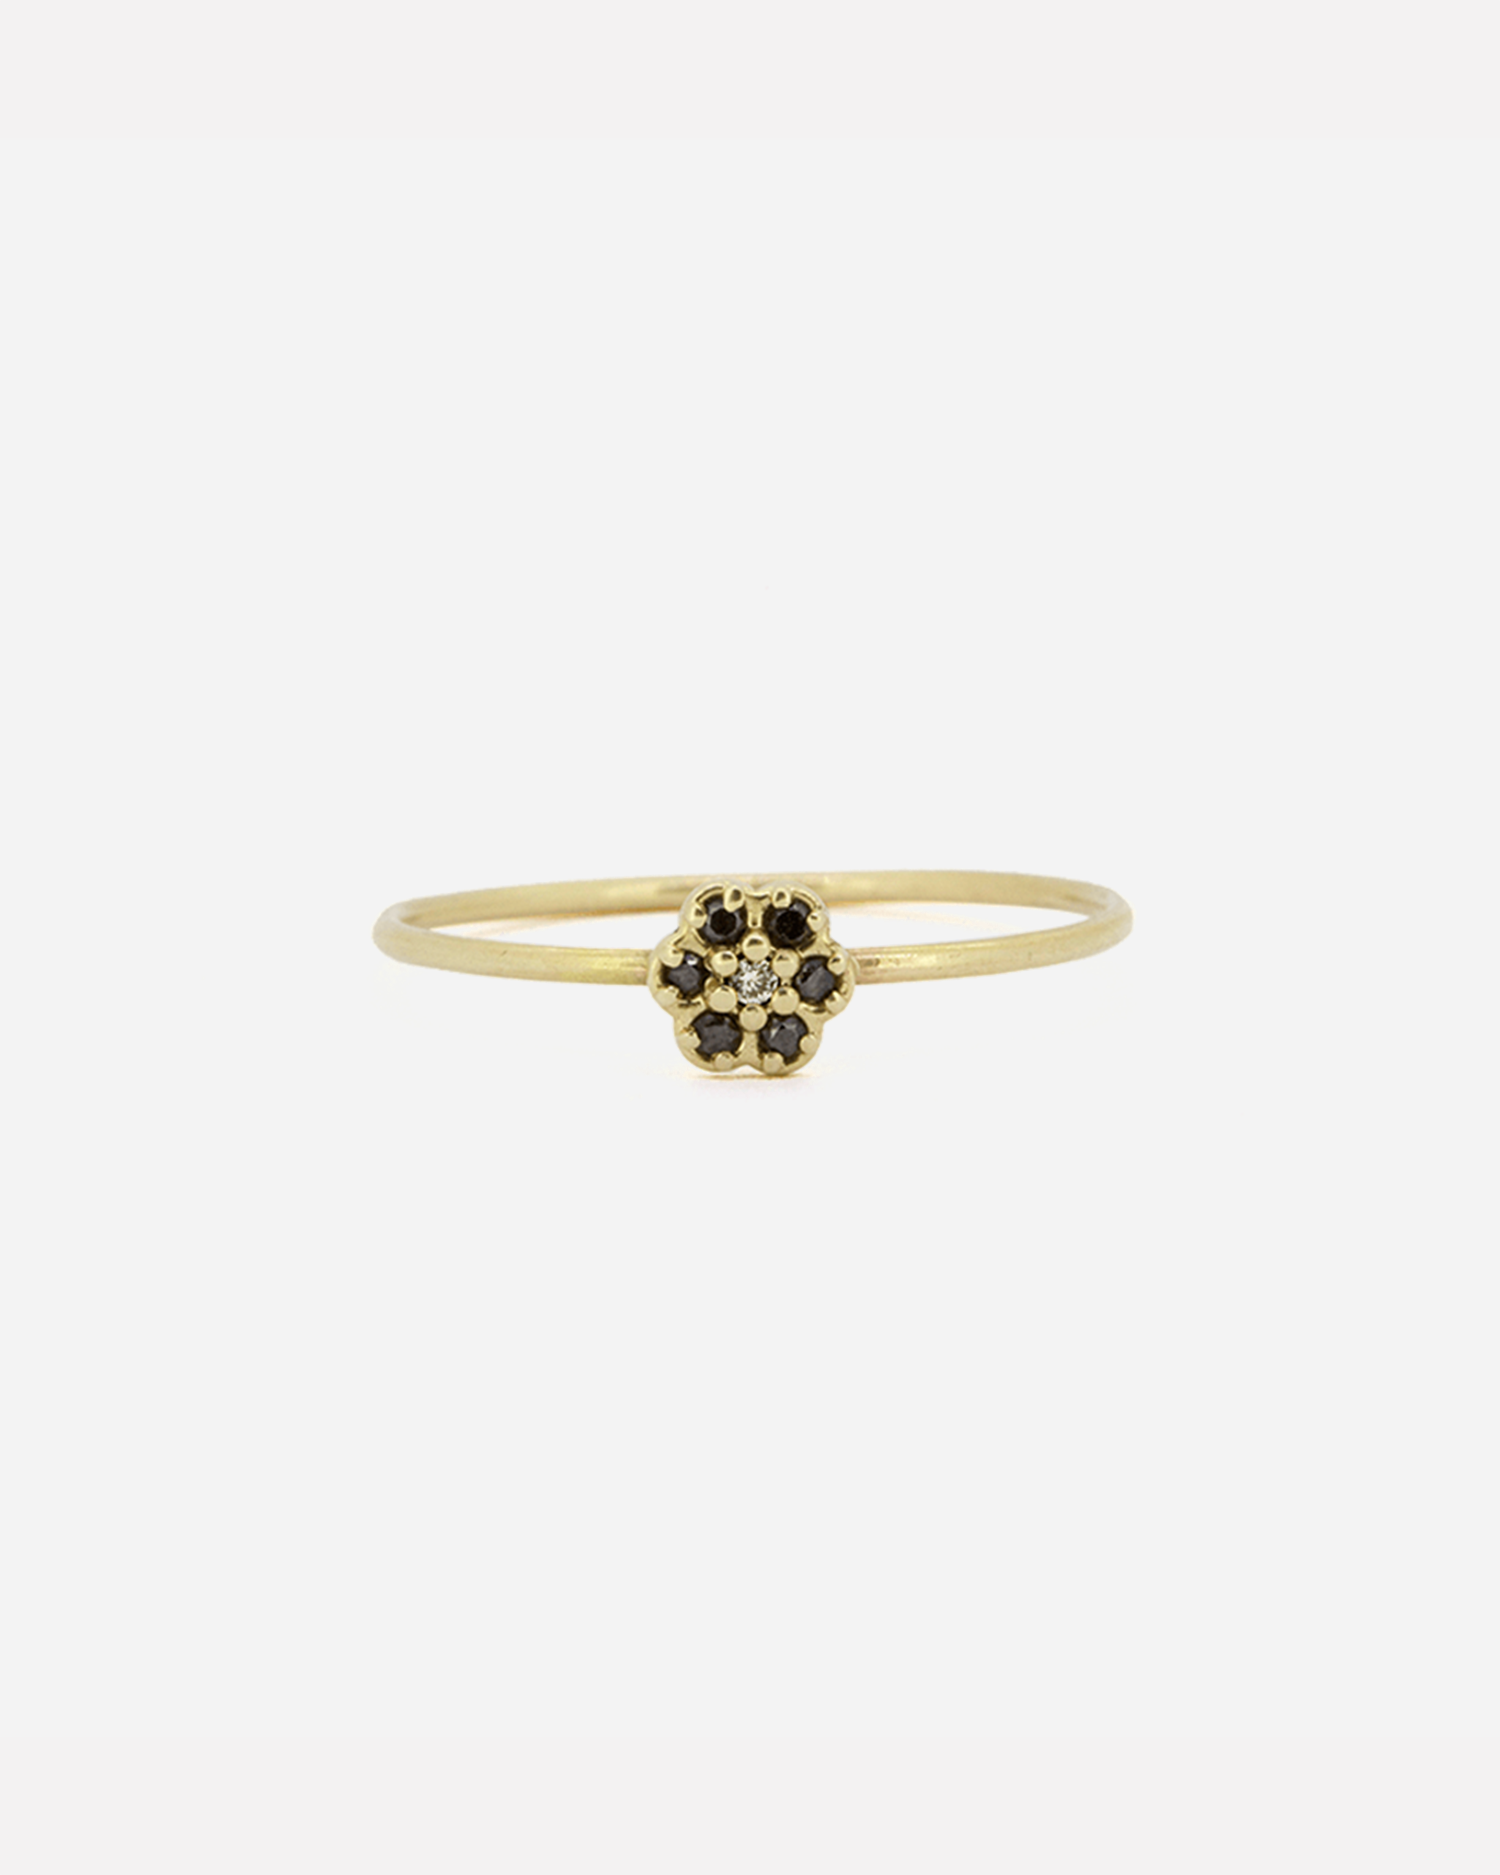 Flower Cluster / Black Diamond Ring By fitzgerald jewelry